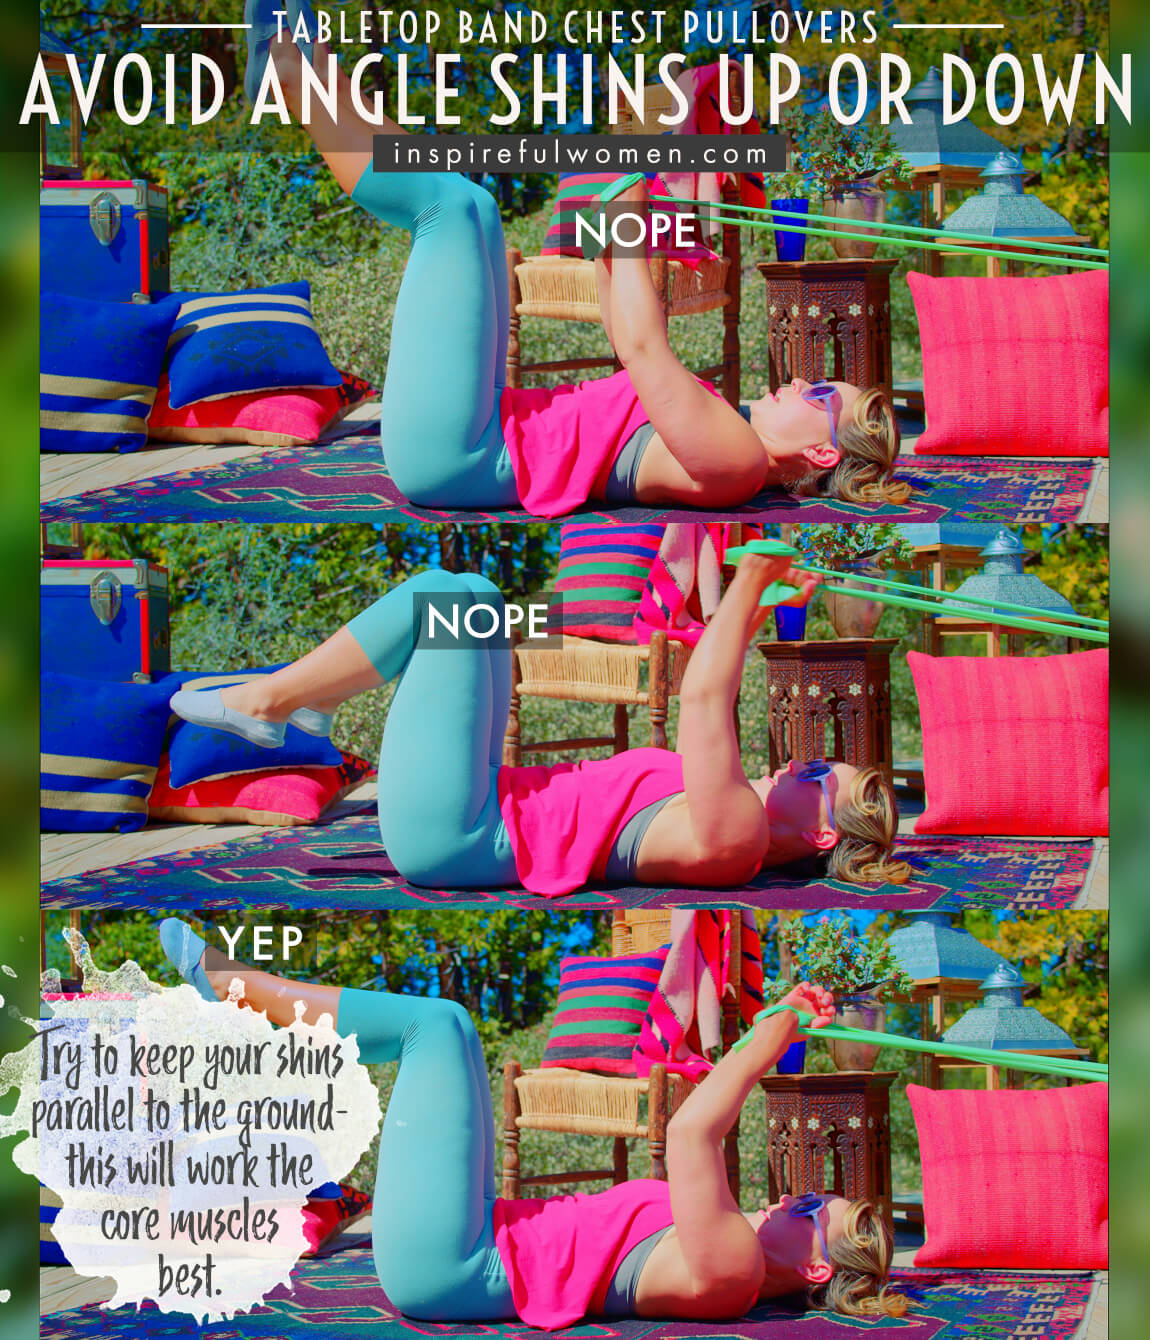 avoid-angle-shins-up-or-down-tabletop-band-chest-pullover-common-mistakes